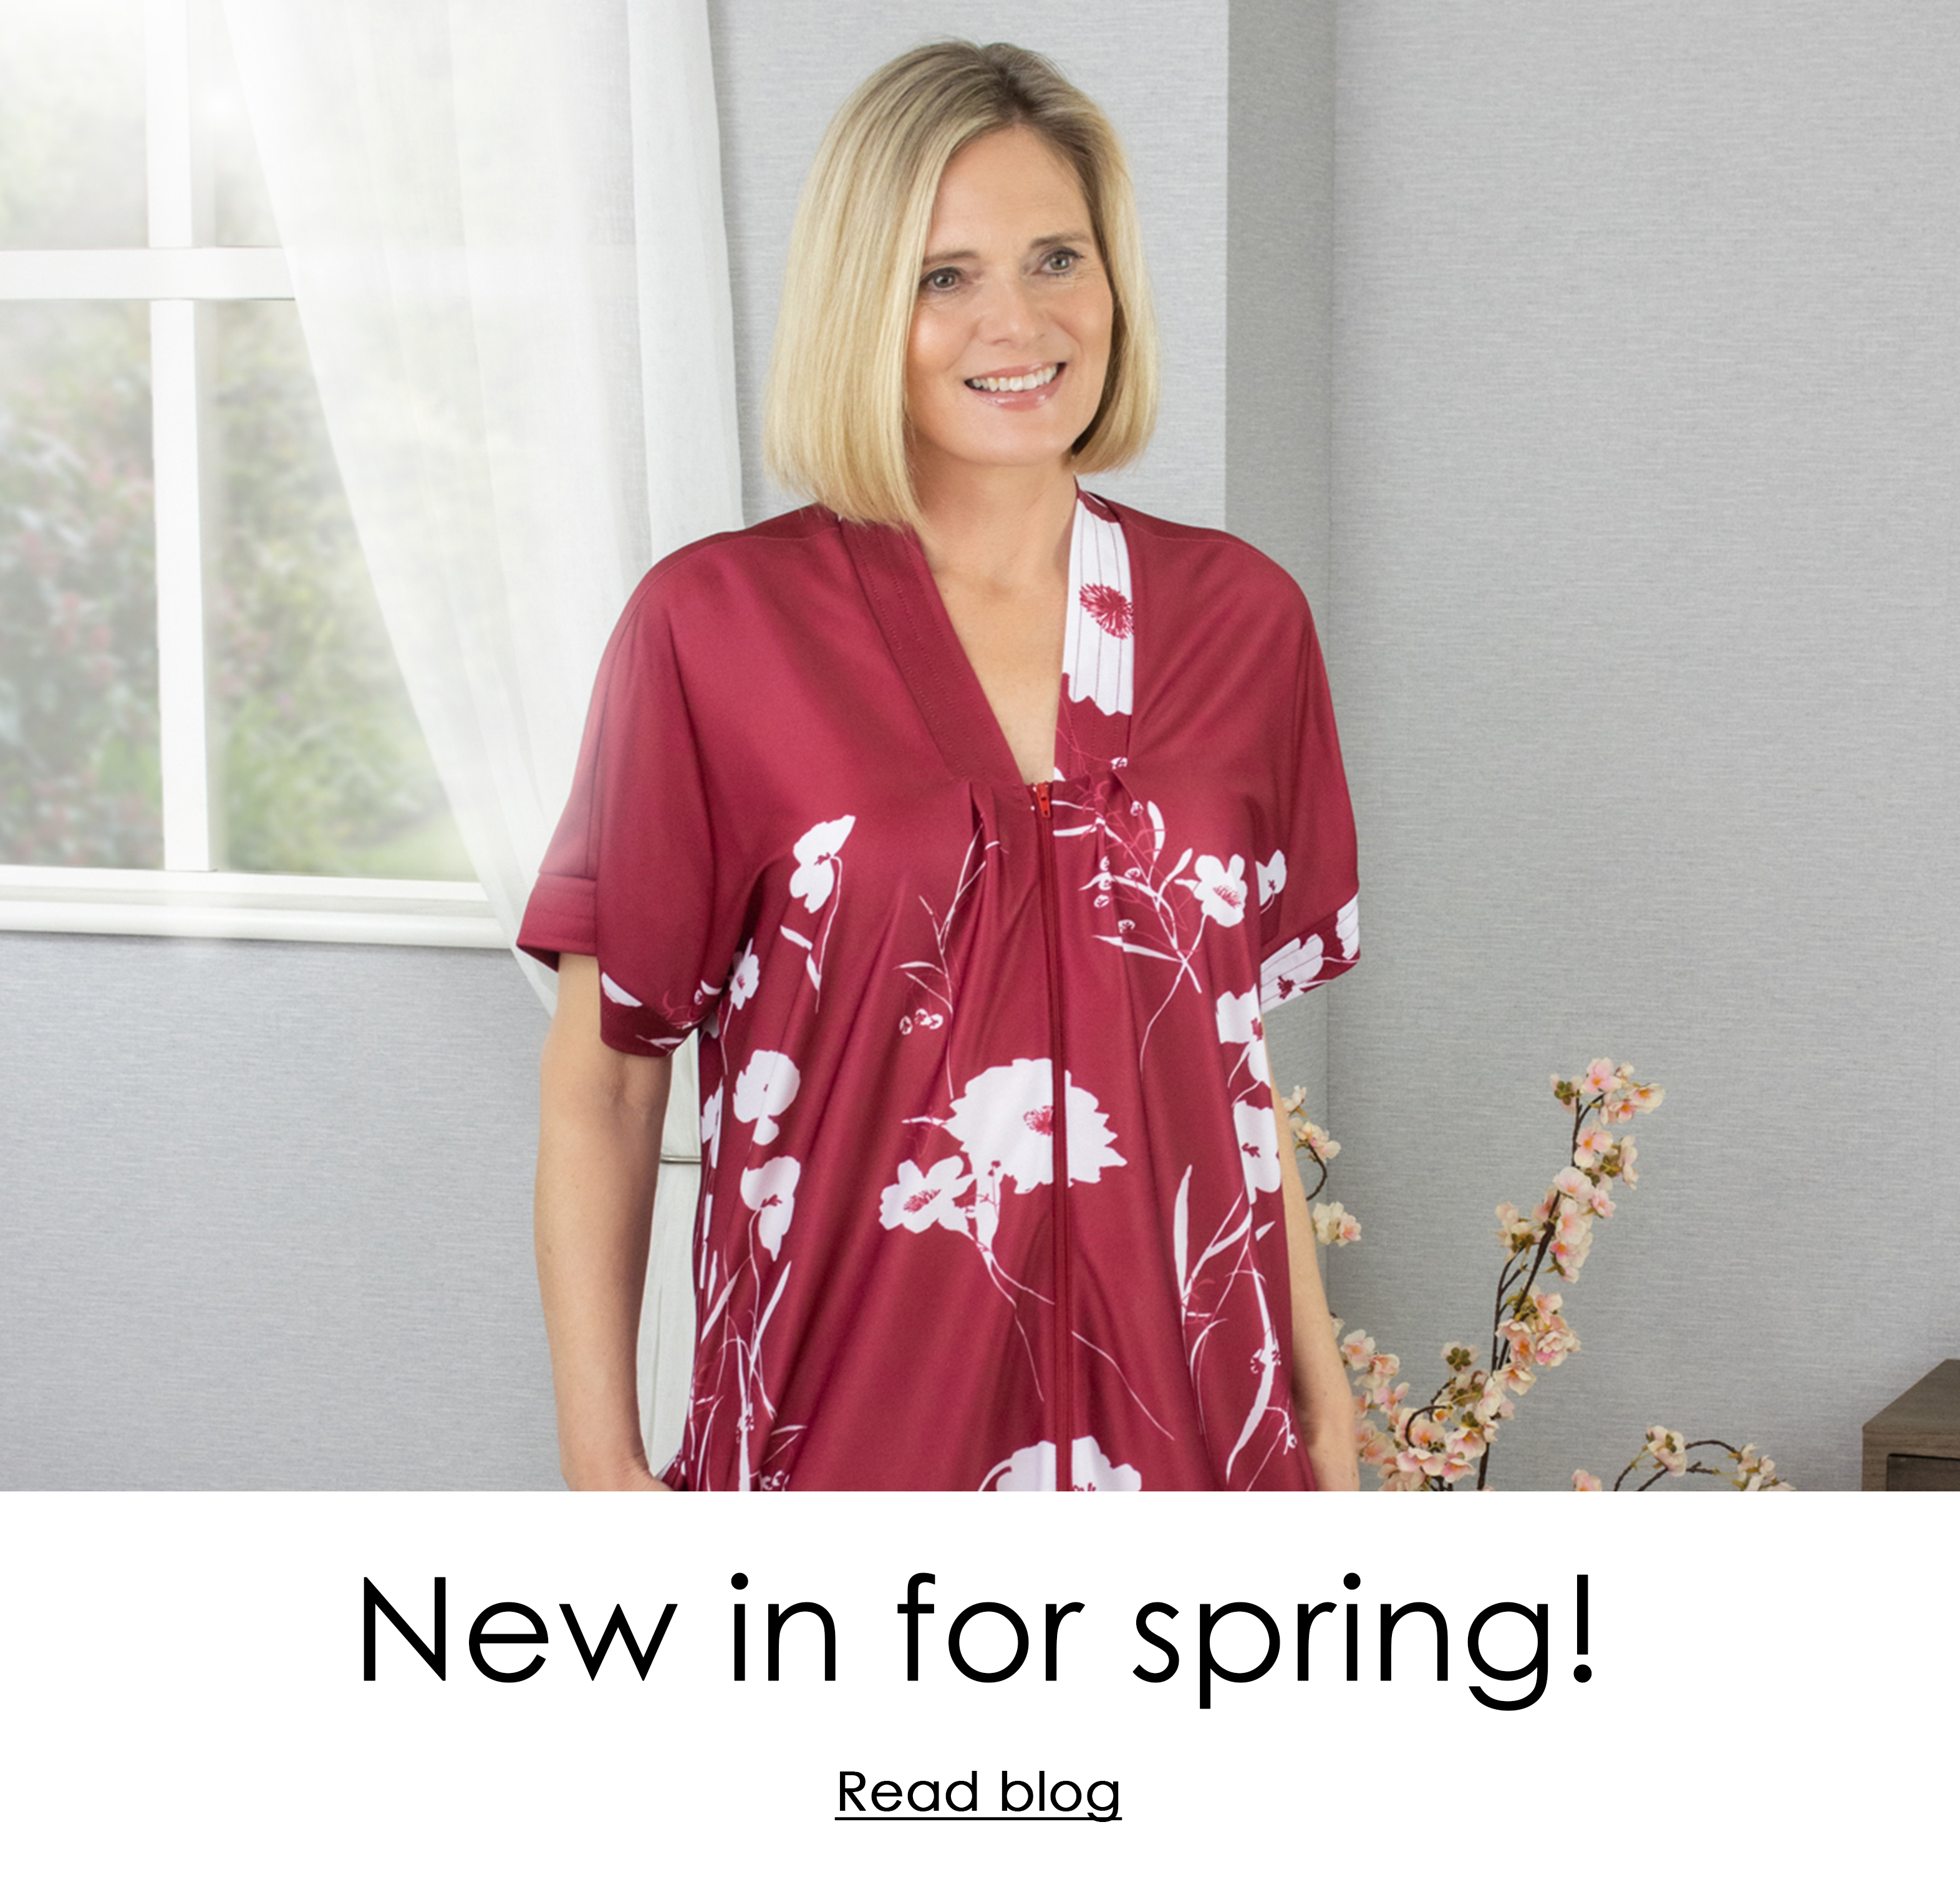 New In for Spring!